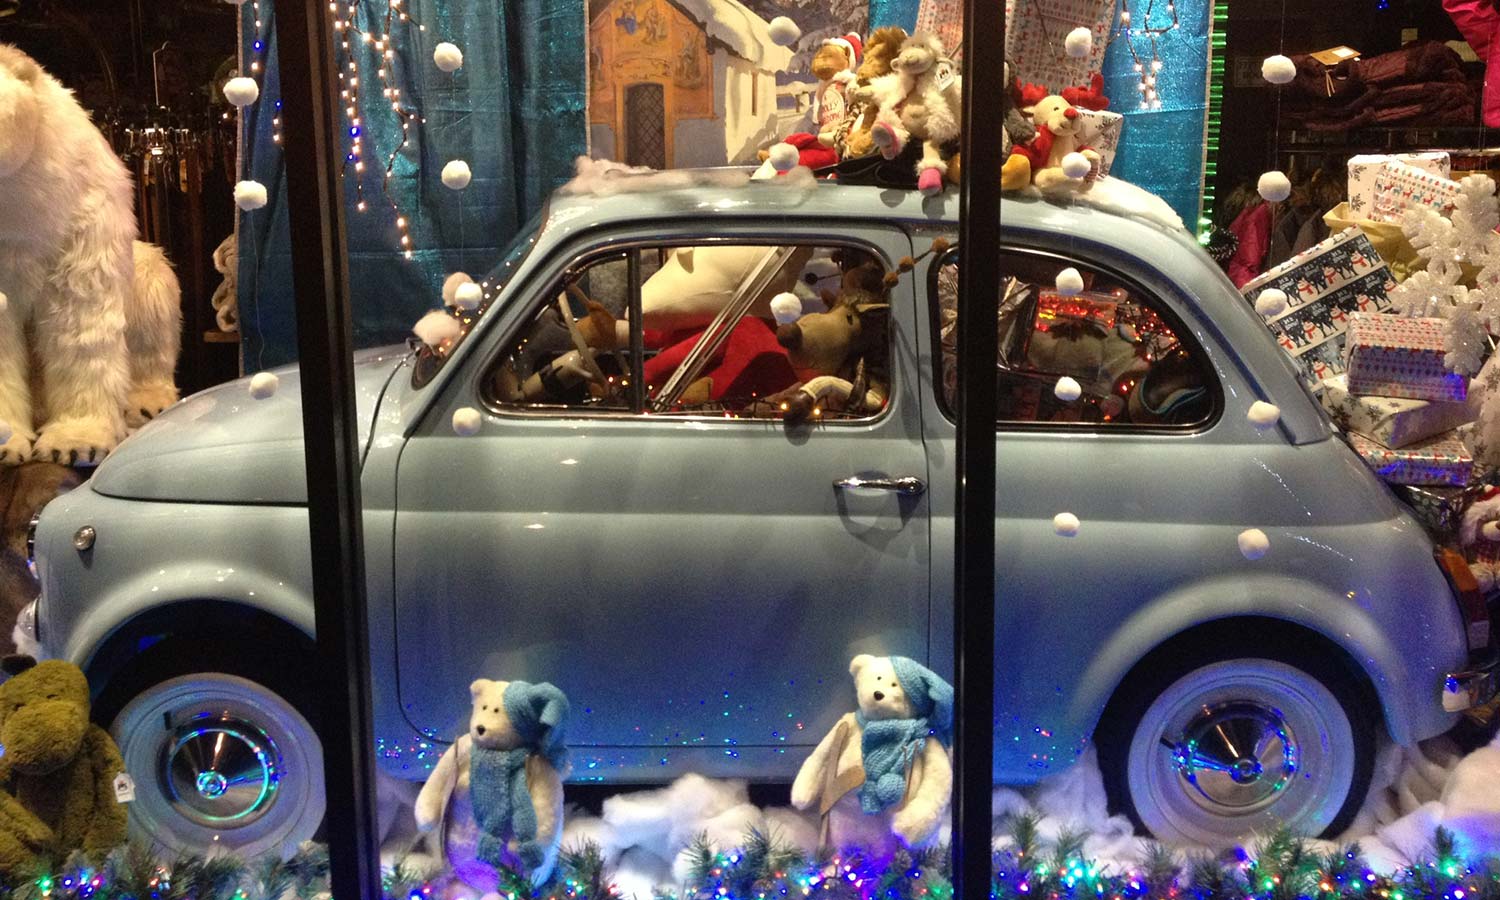 In Christmas 2017 Anna Davies Christmas window featured a powder blue Fiat 500